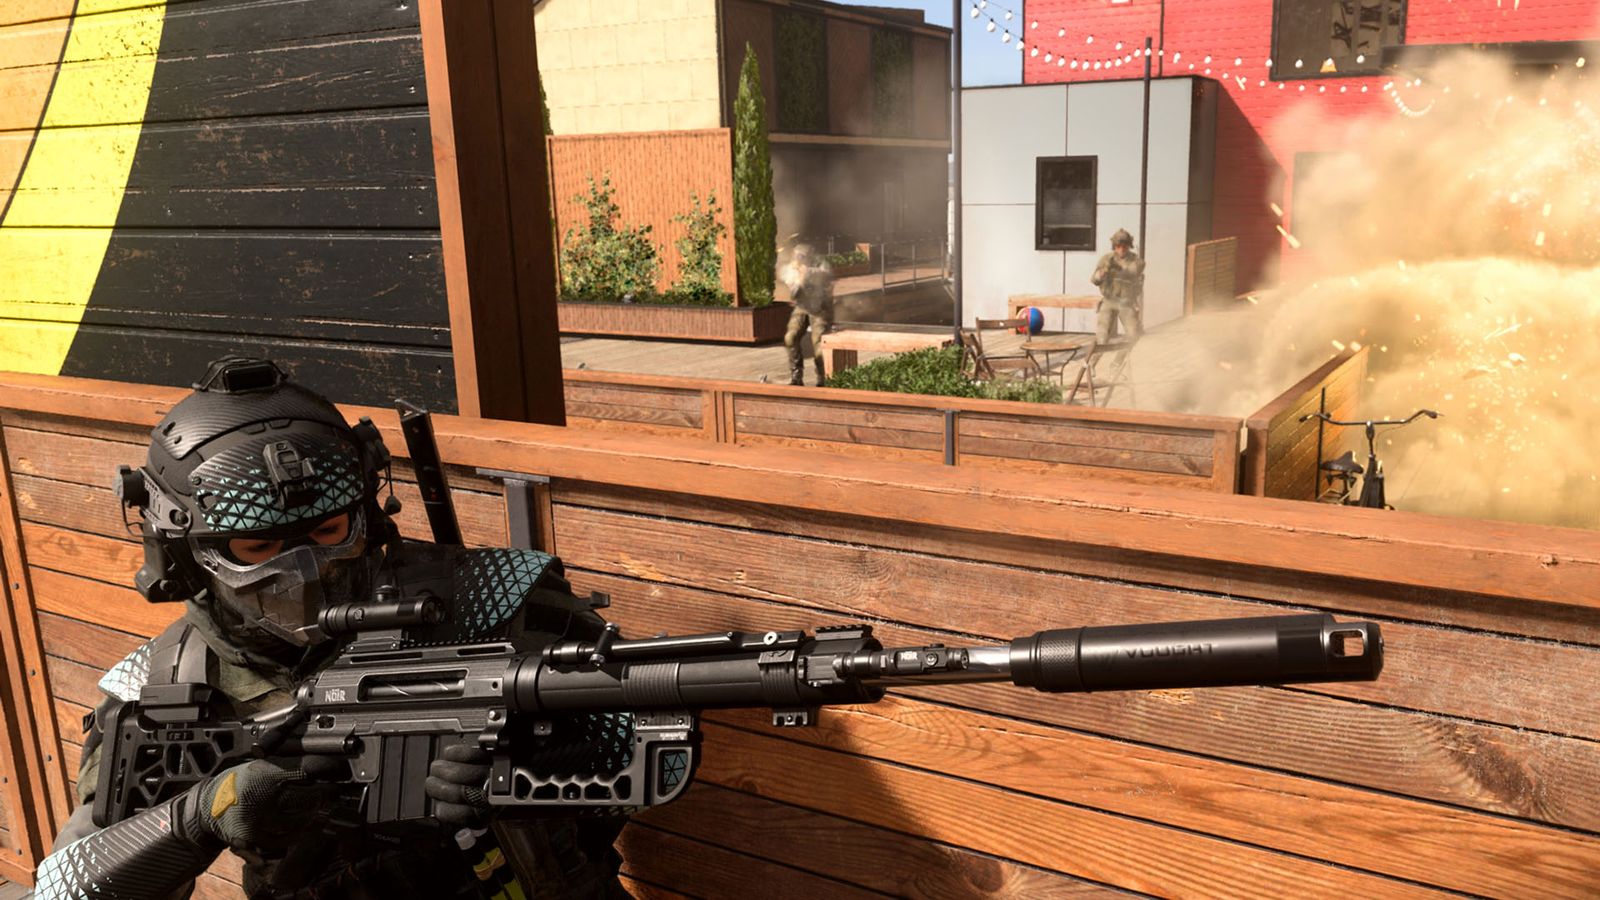 Screenshot of Modern Warfare 2 player taking cover while holding sniper rifle